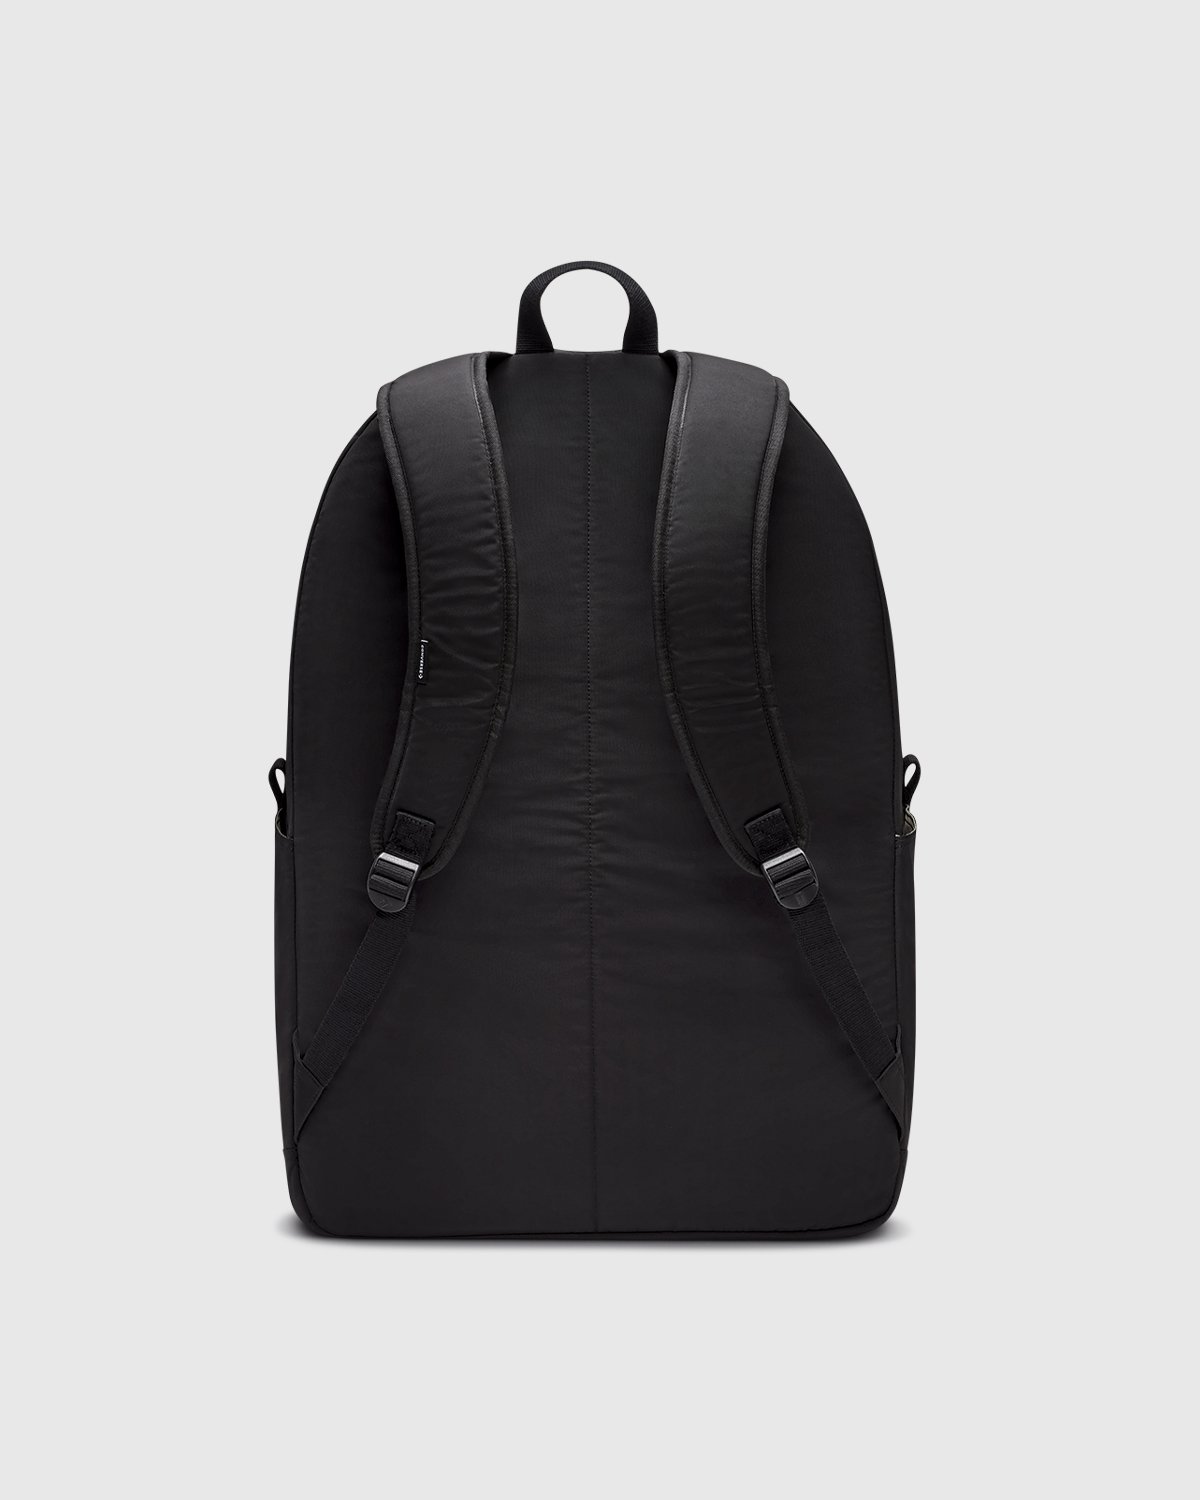 Converse x Rick Owens - Oversized Backpack Black - Accessories - Black - Image 2